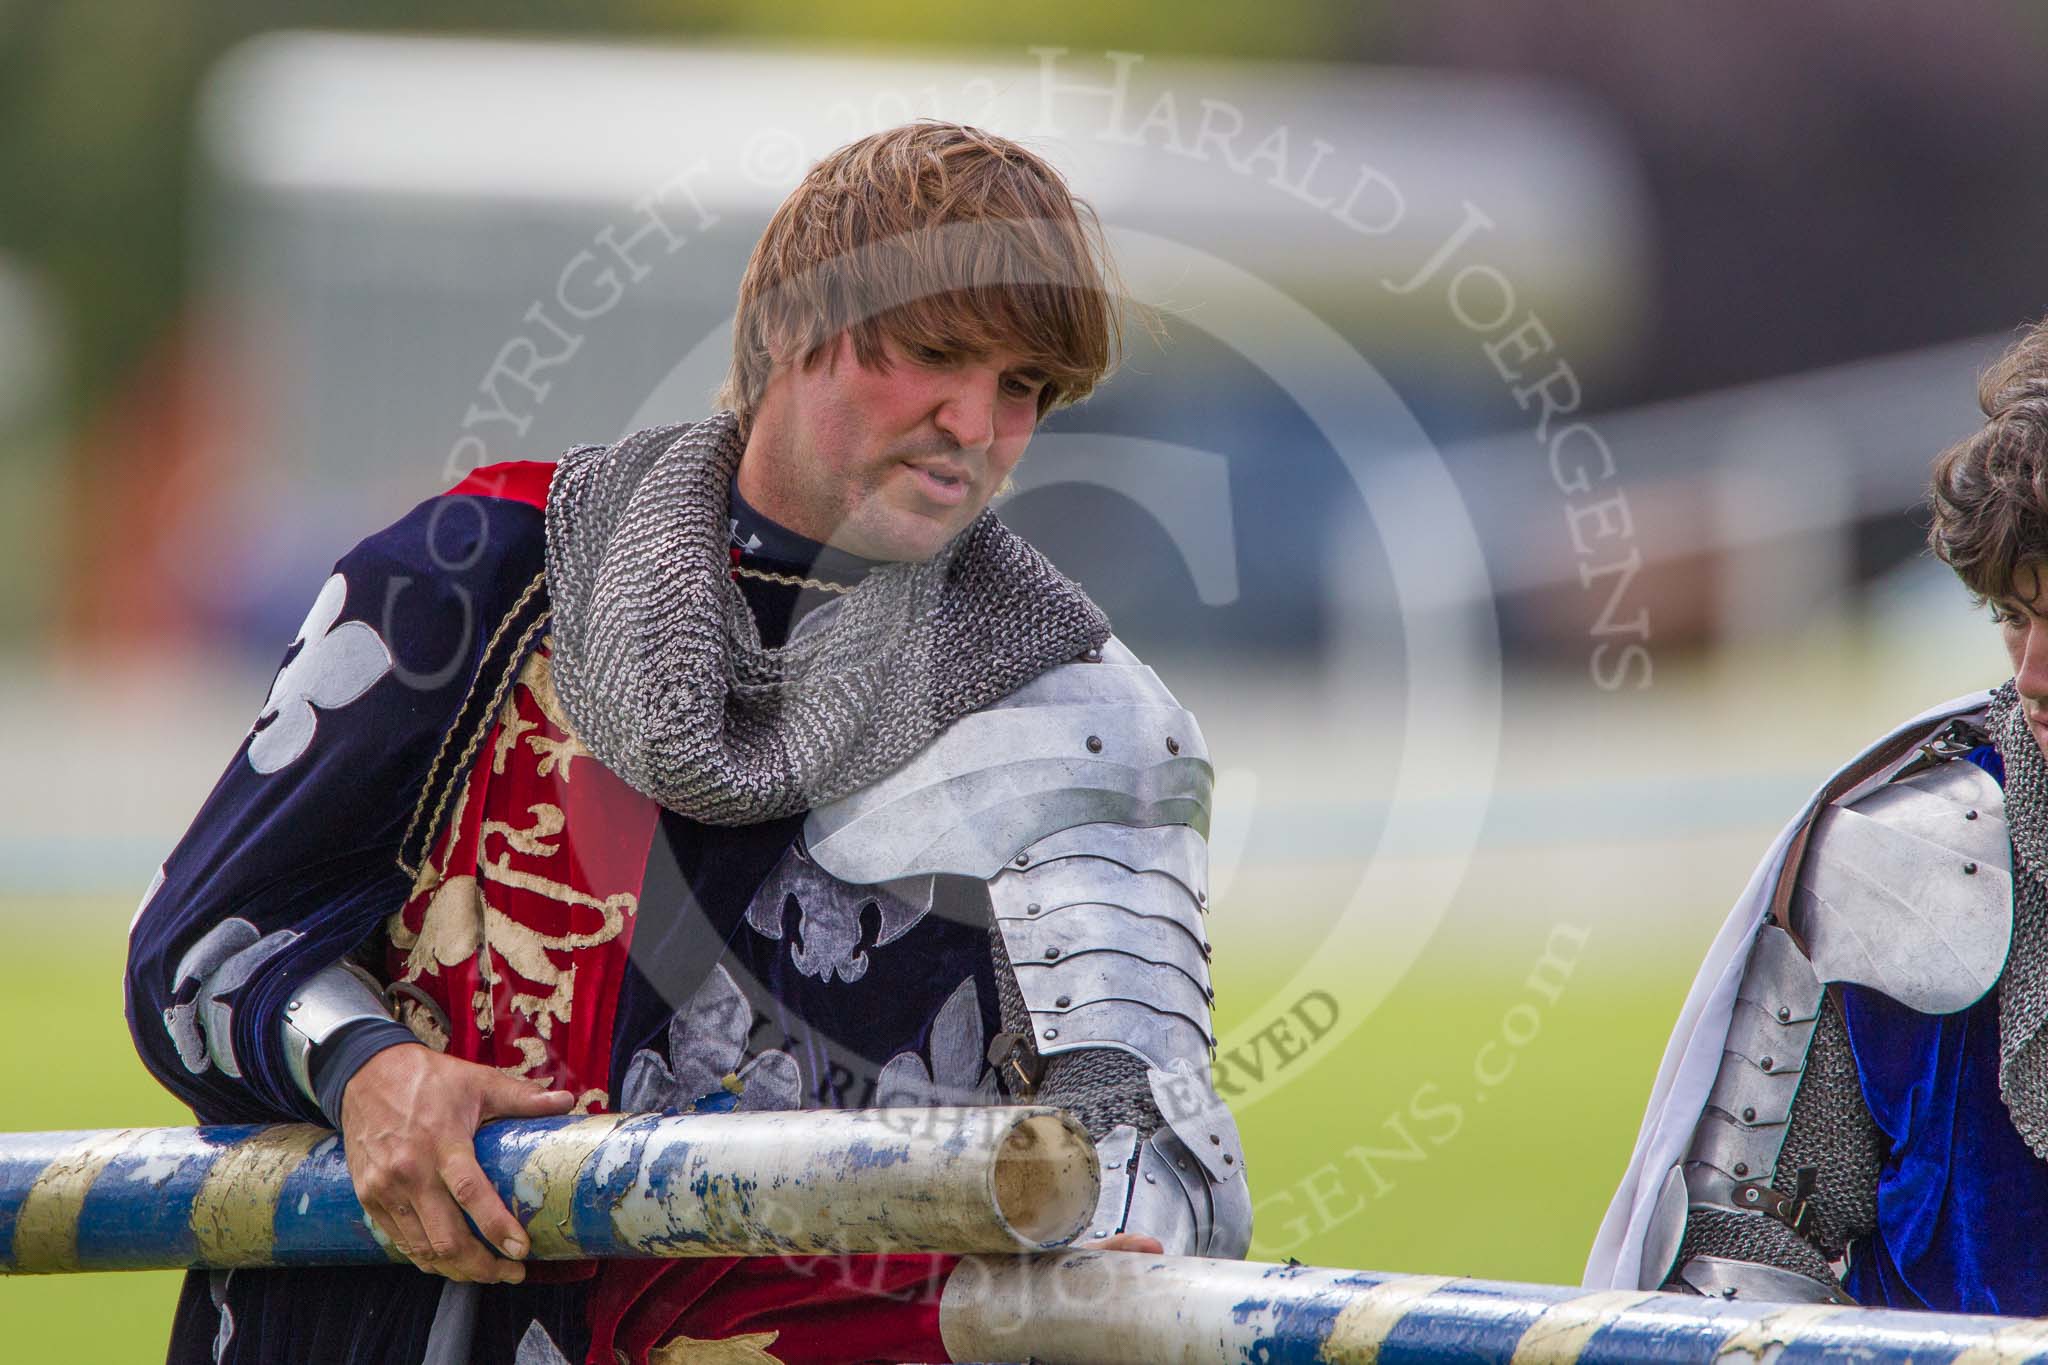 DBPC Polo in the Park 2012: The Knights of Middle England - preparations for the Jousting display..
Dallas Burston Polo Club,
Stoneythorpe Estate,
Southam,
Warwickshire,
United Kingdom,
on 16 September 2012 at 13:49, image #167